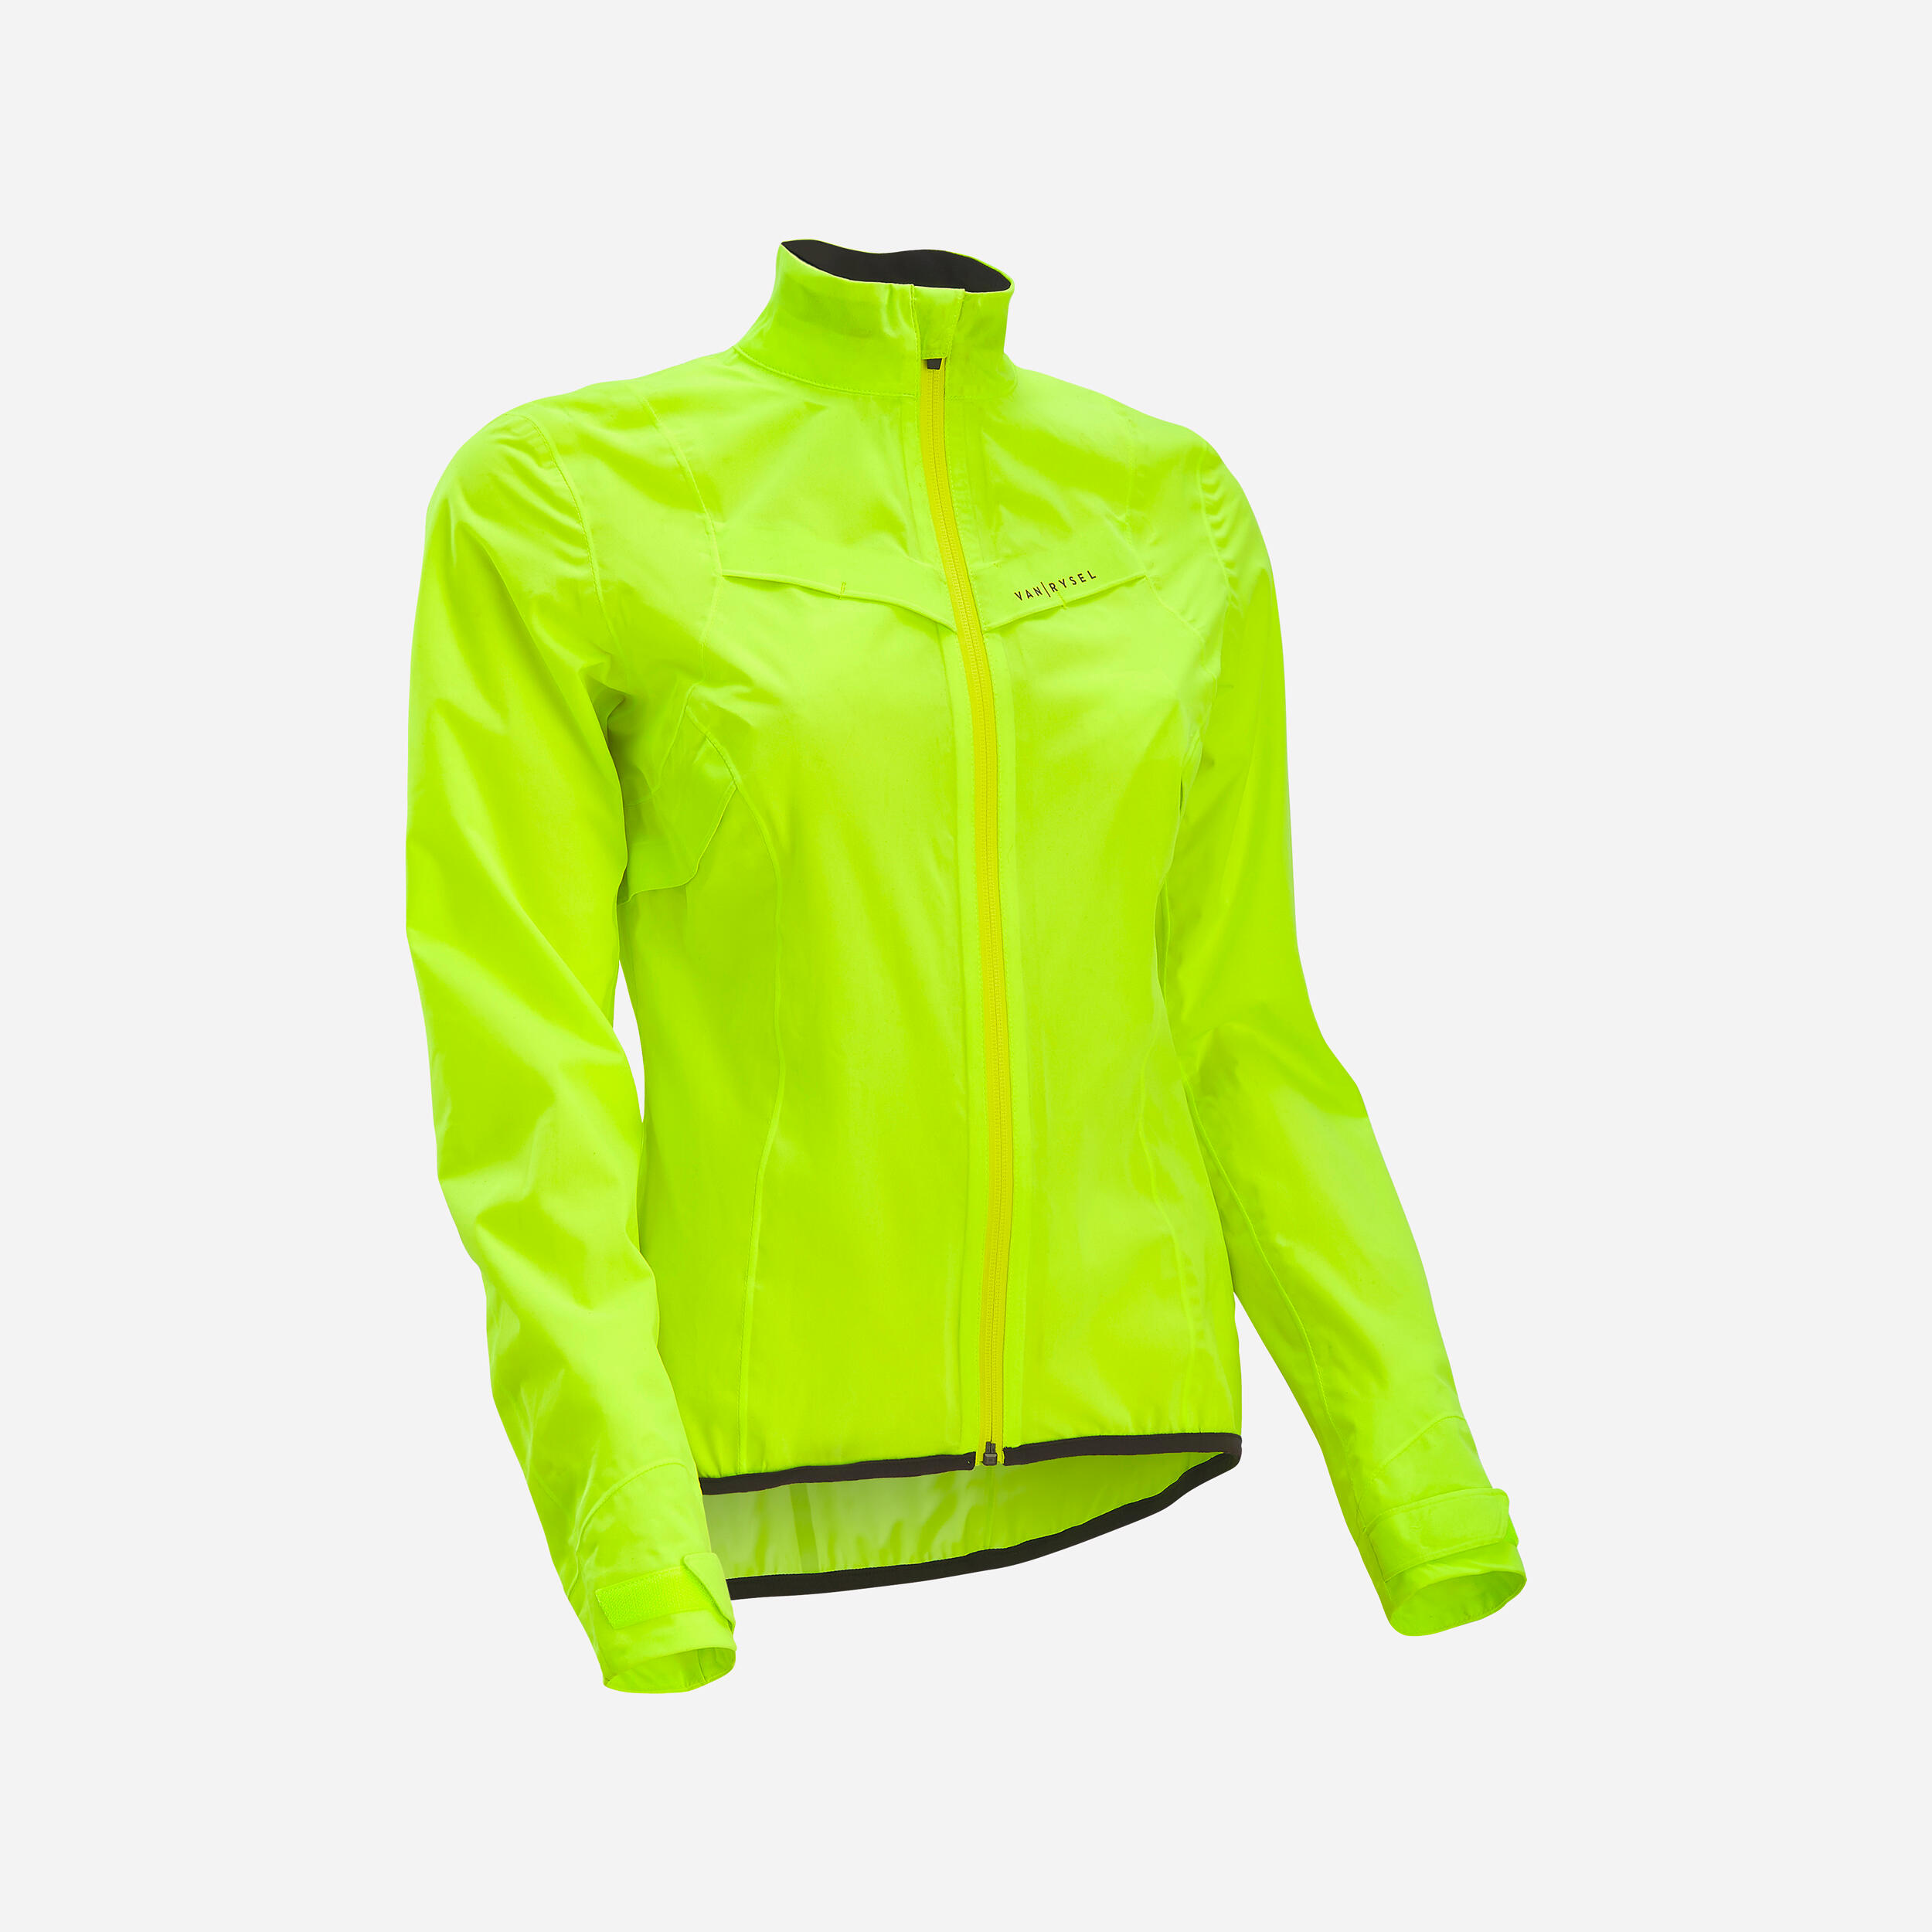 Racer cycling windproof jacket